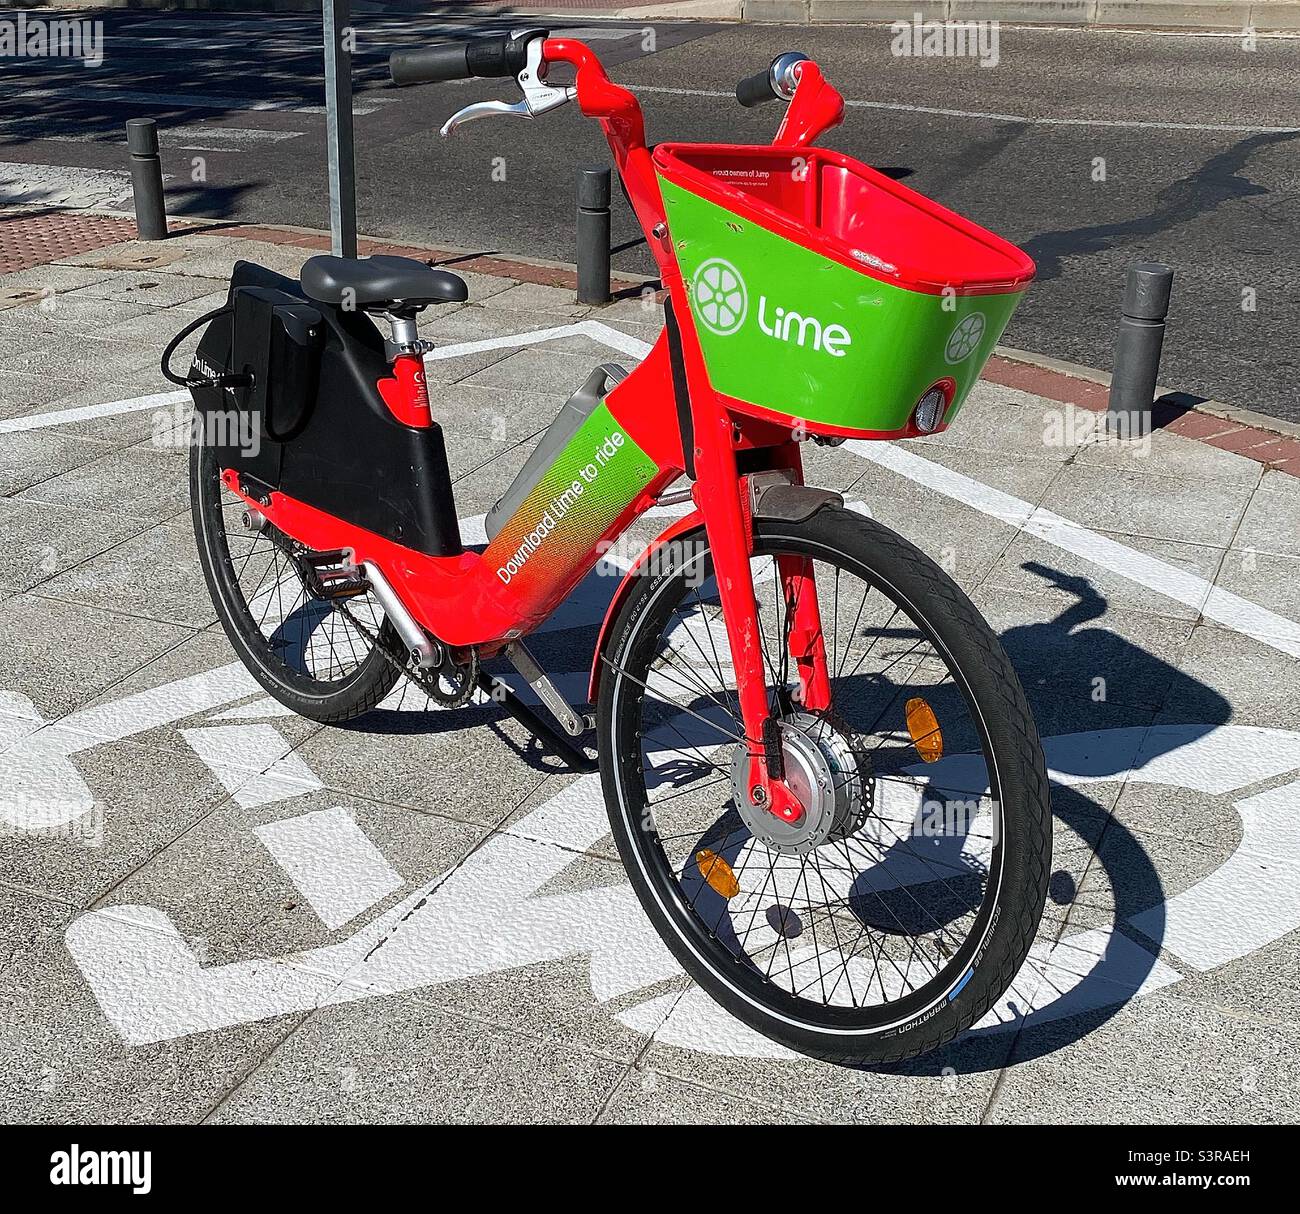 A Lime e-bike is parked in a designated space ready for the next member to use it. Electric bikes are becoming more and more popular for short journeys as an alternative to cars. Stock Photo